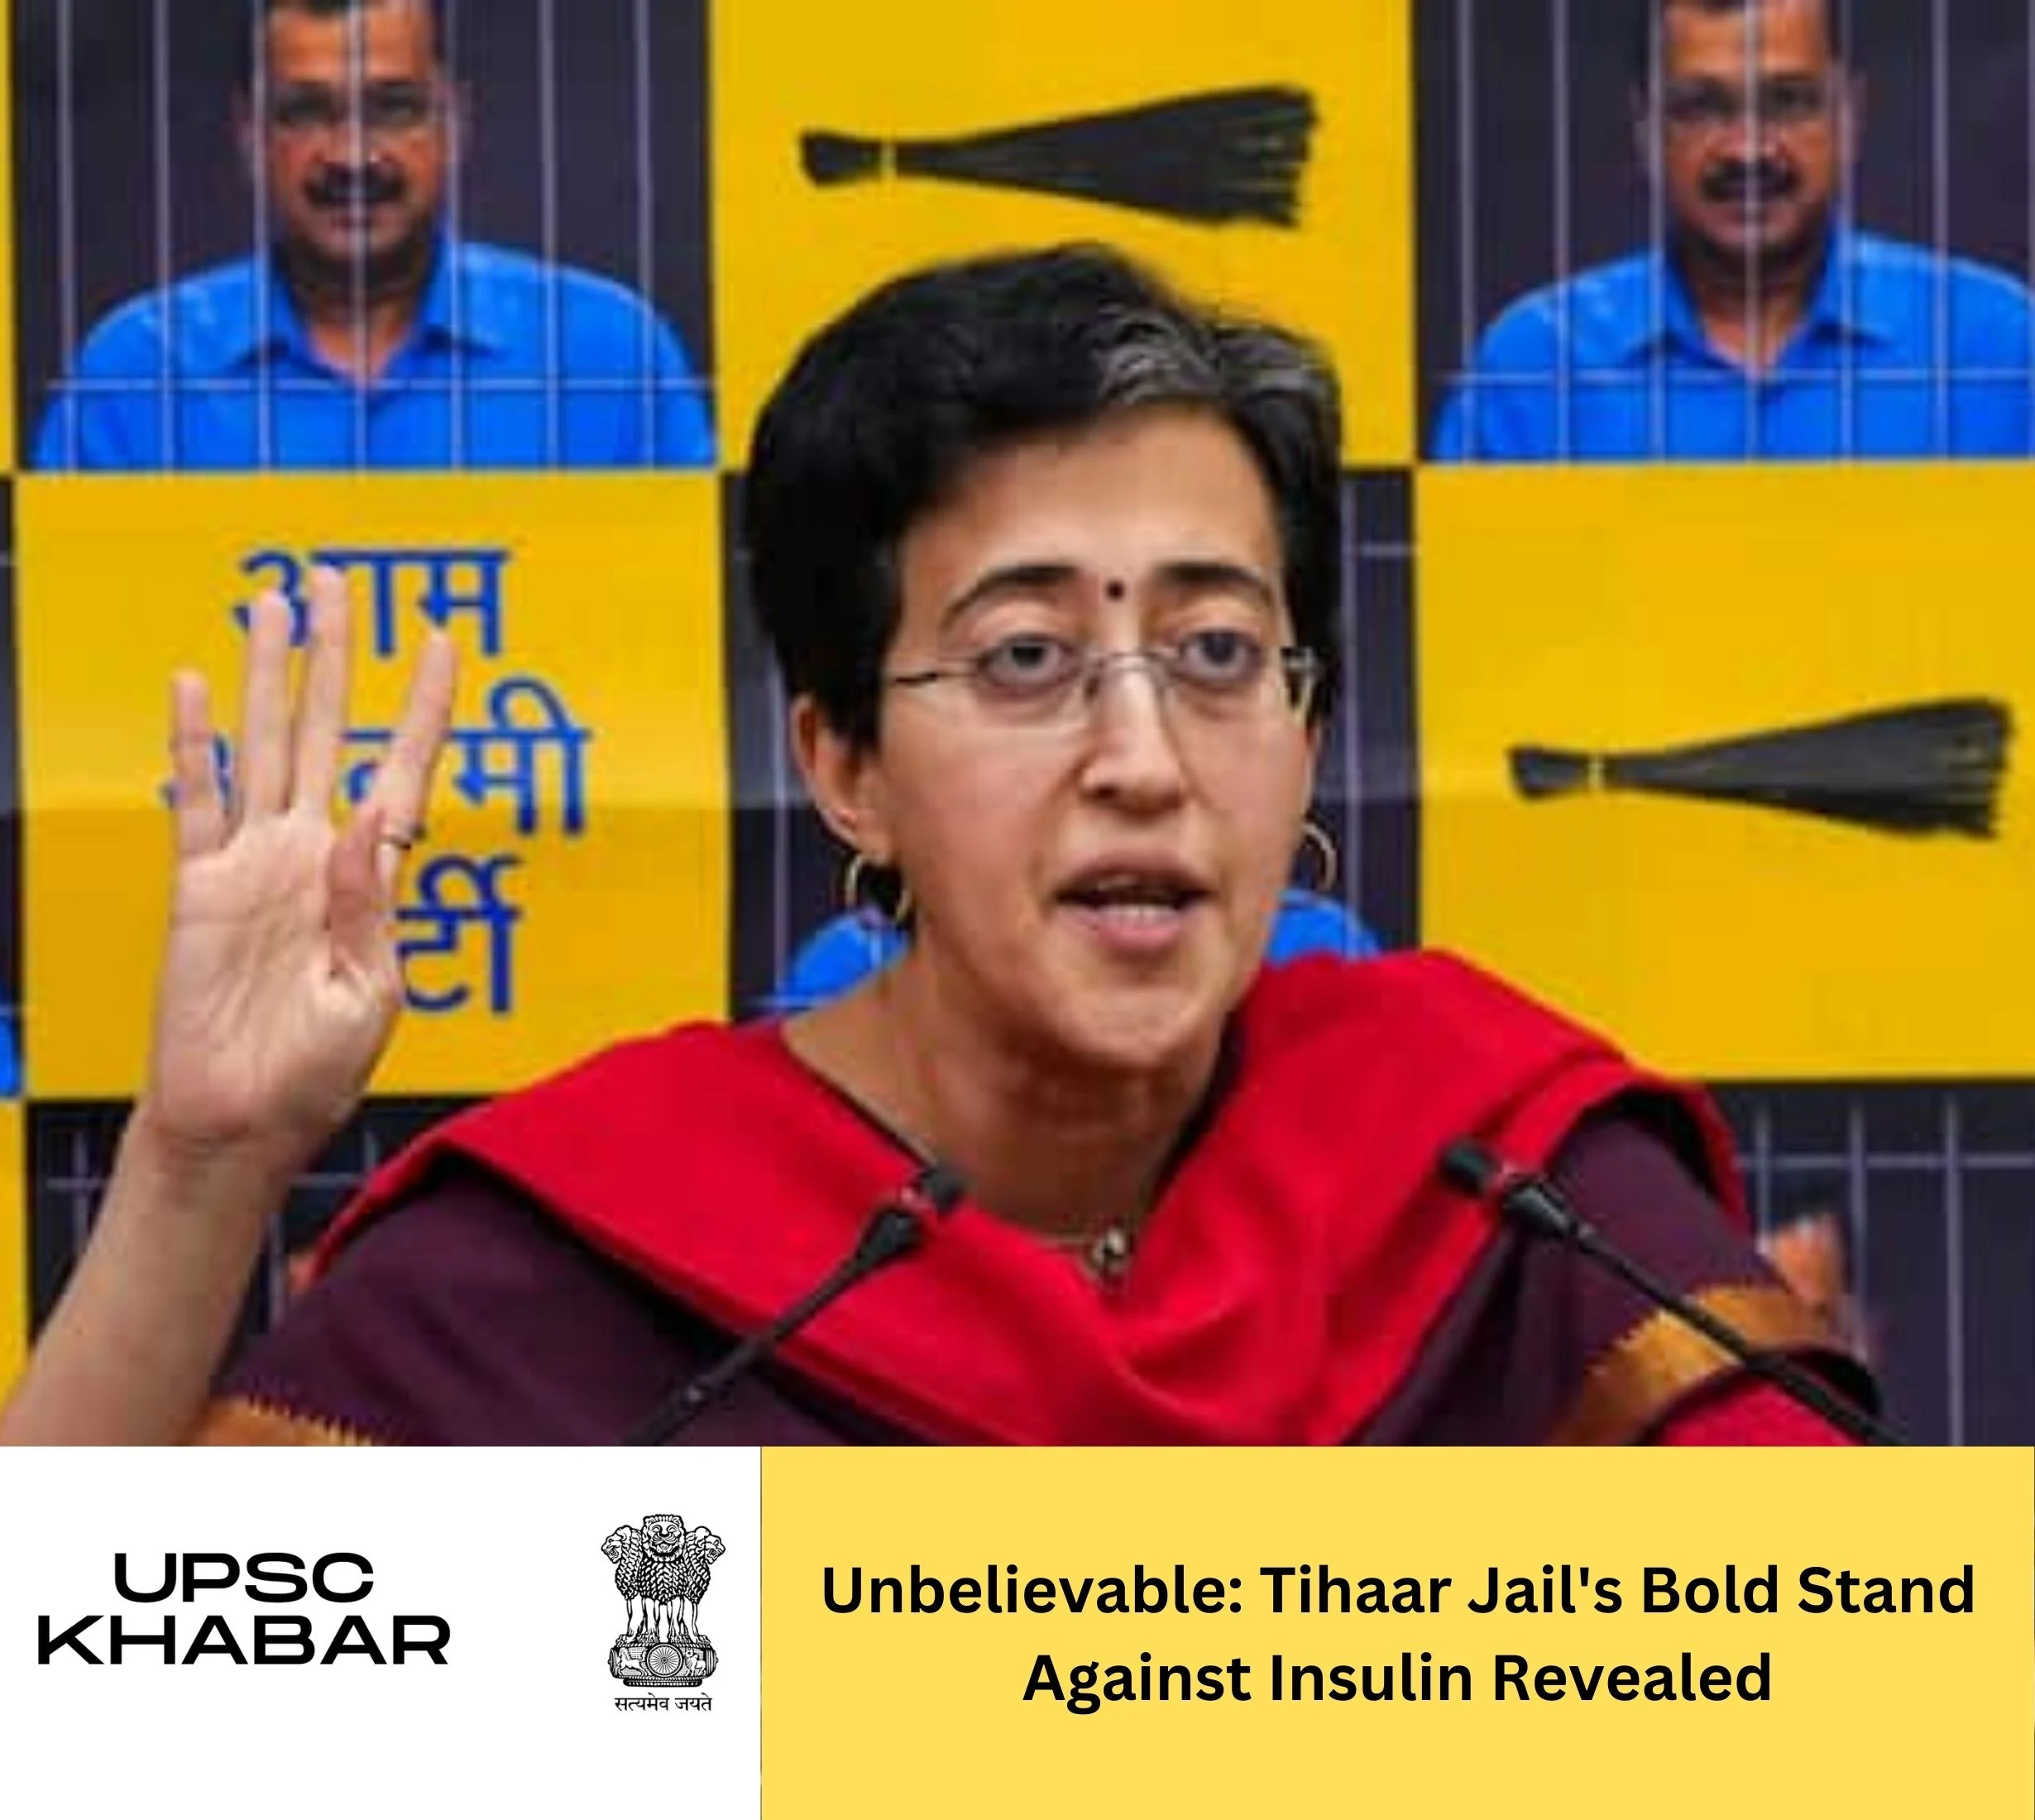 Unbelievable: Tihaar Jail's Bold Stand Against Insulin Revealed